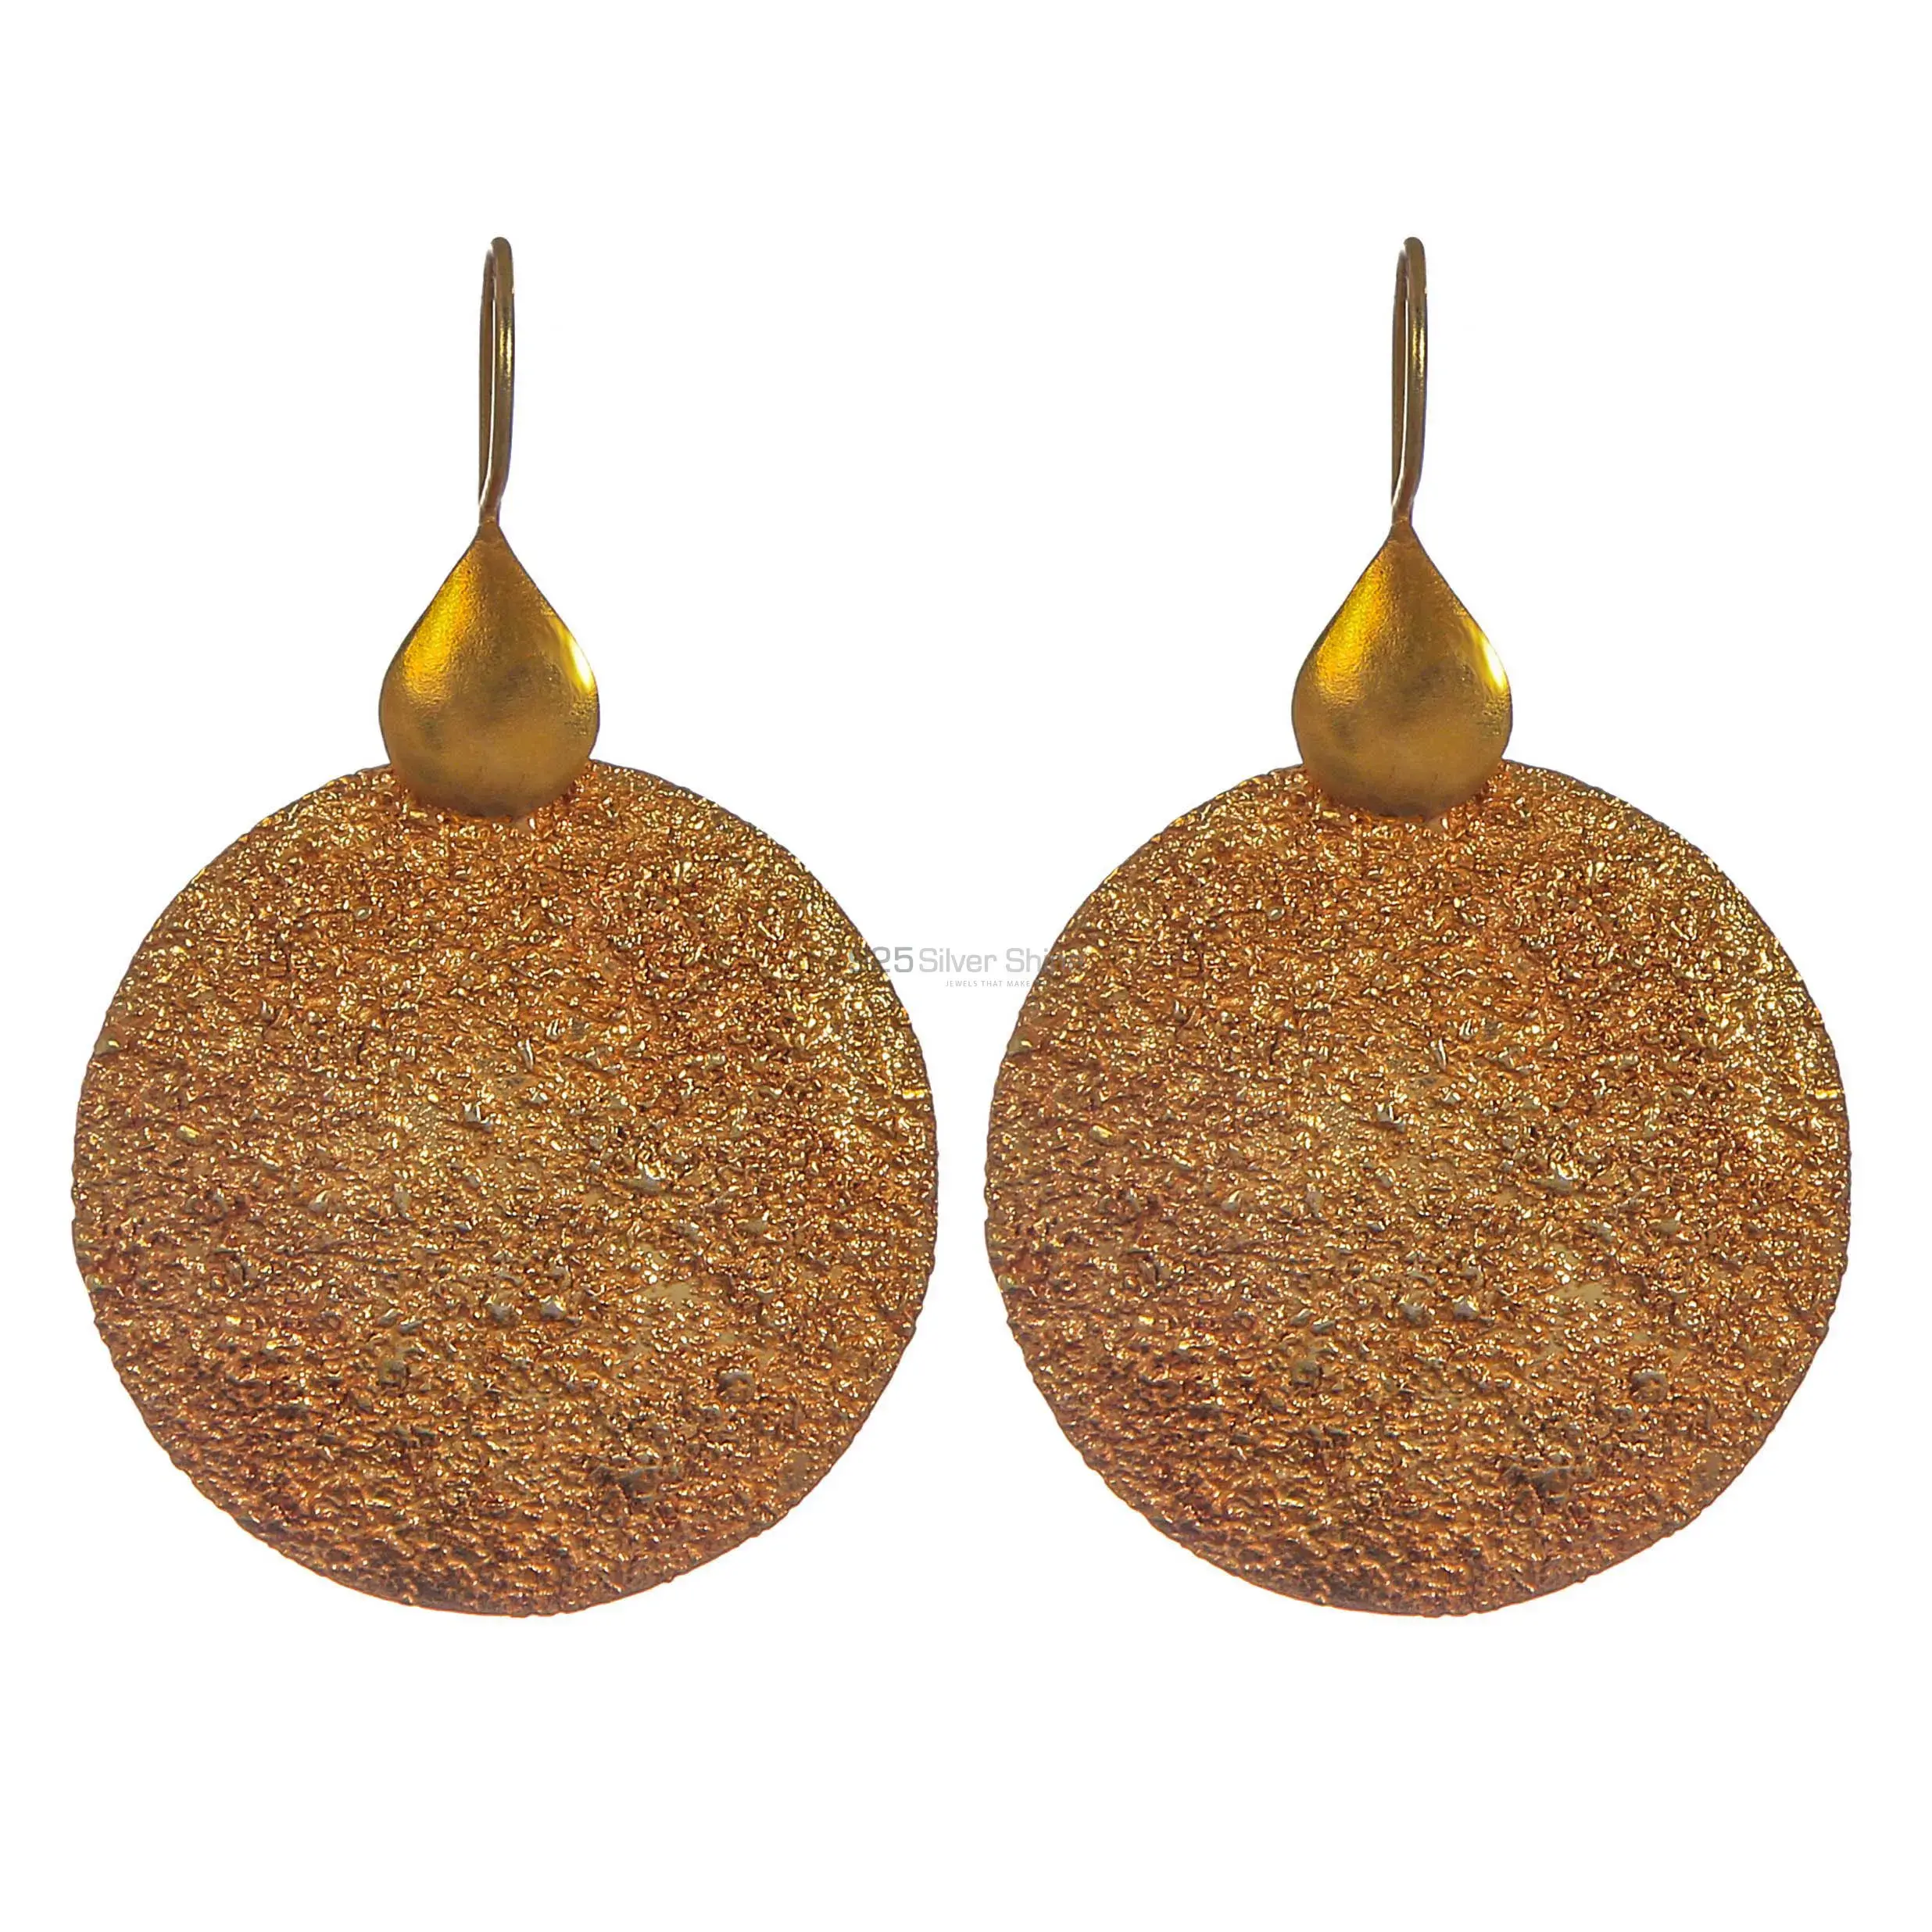 Unique 925 Sterling Silver Earrings Wholesaler In Gold Plated 925SE285